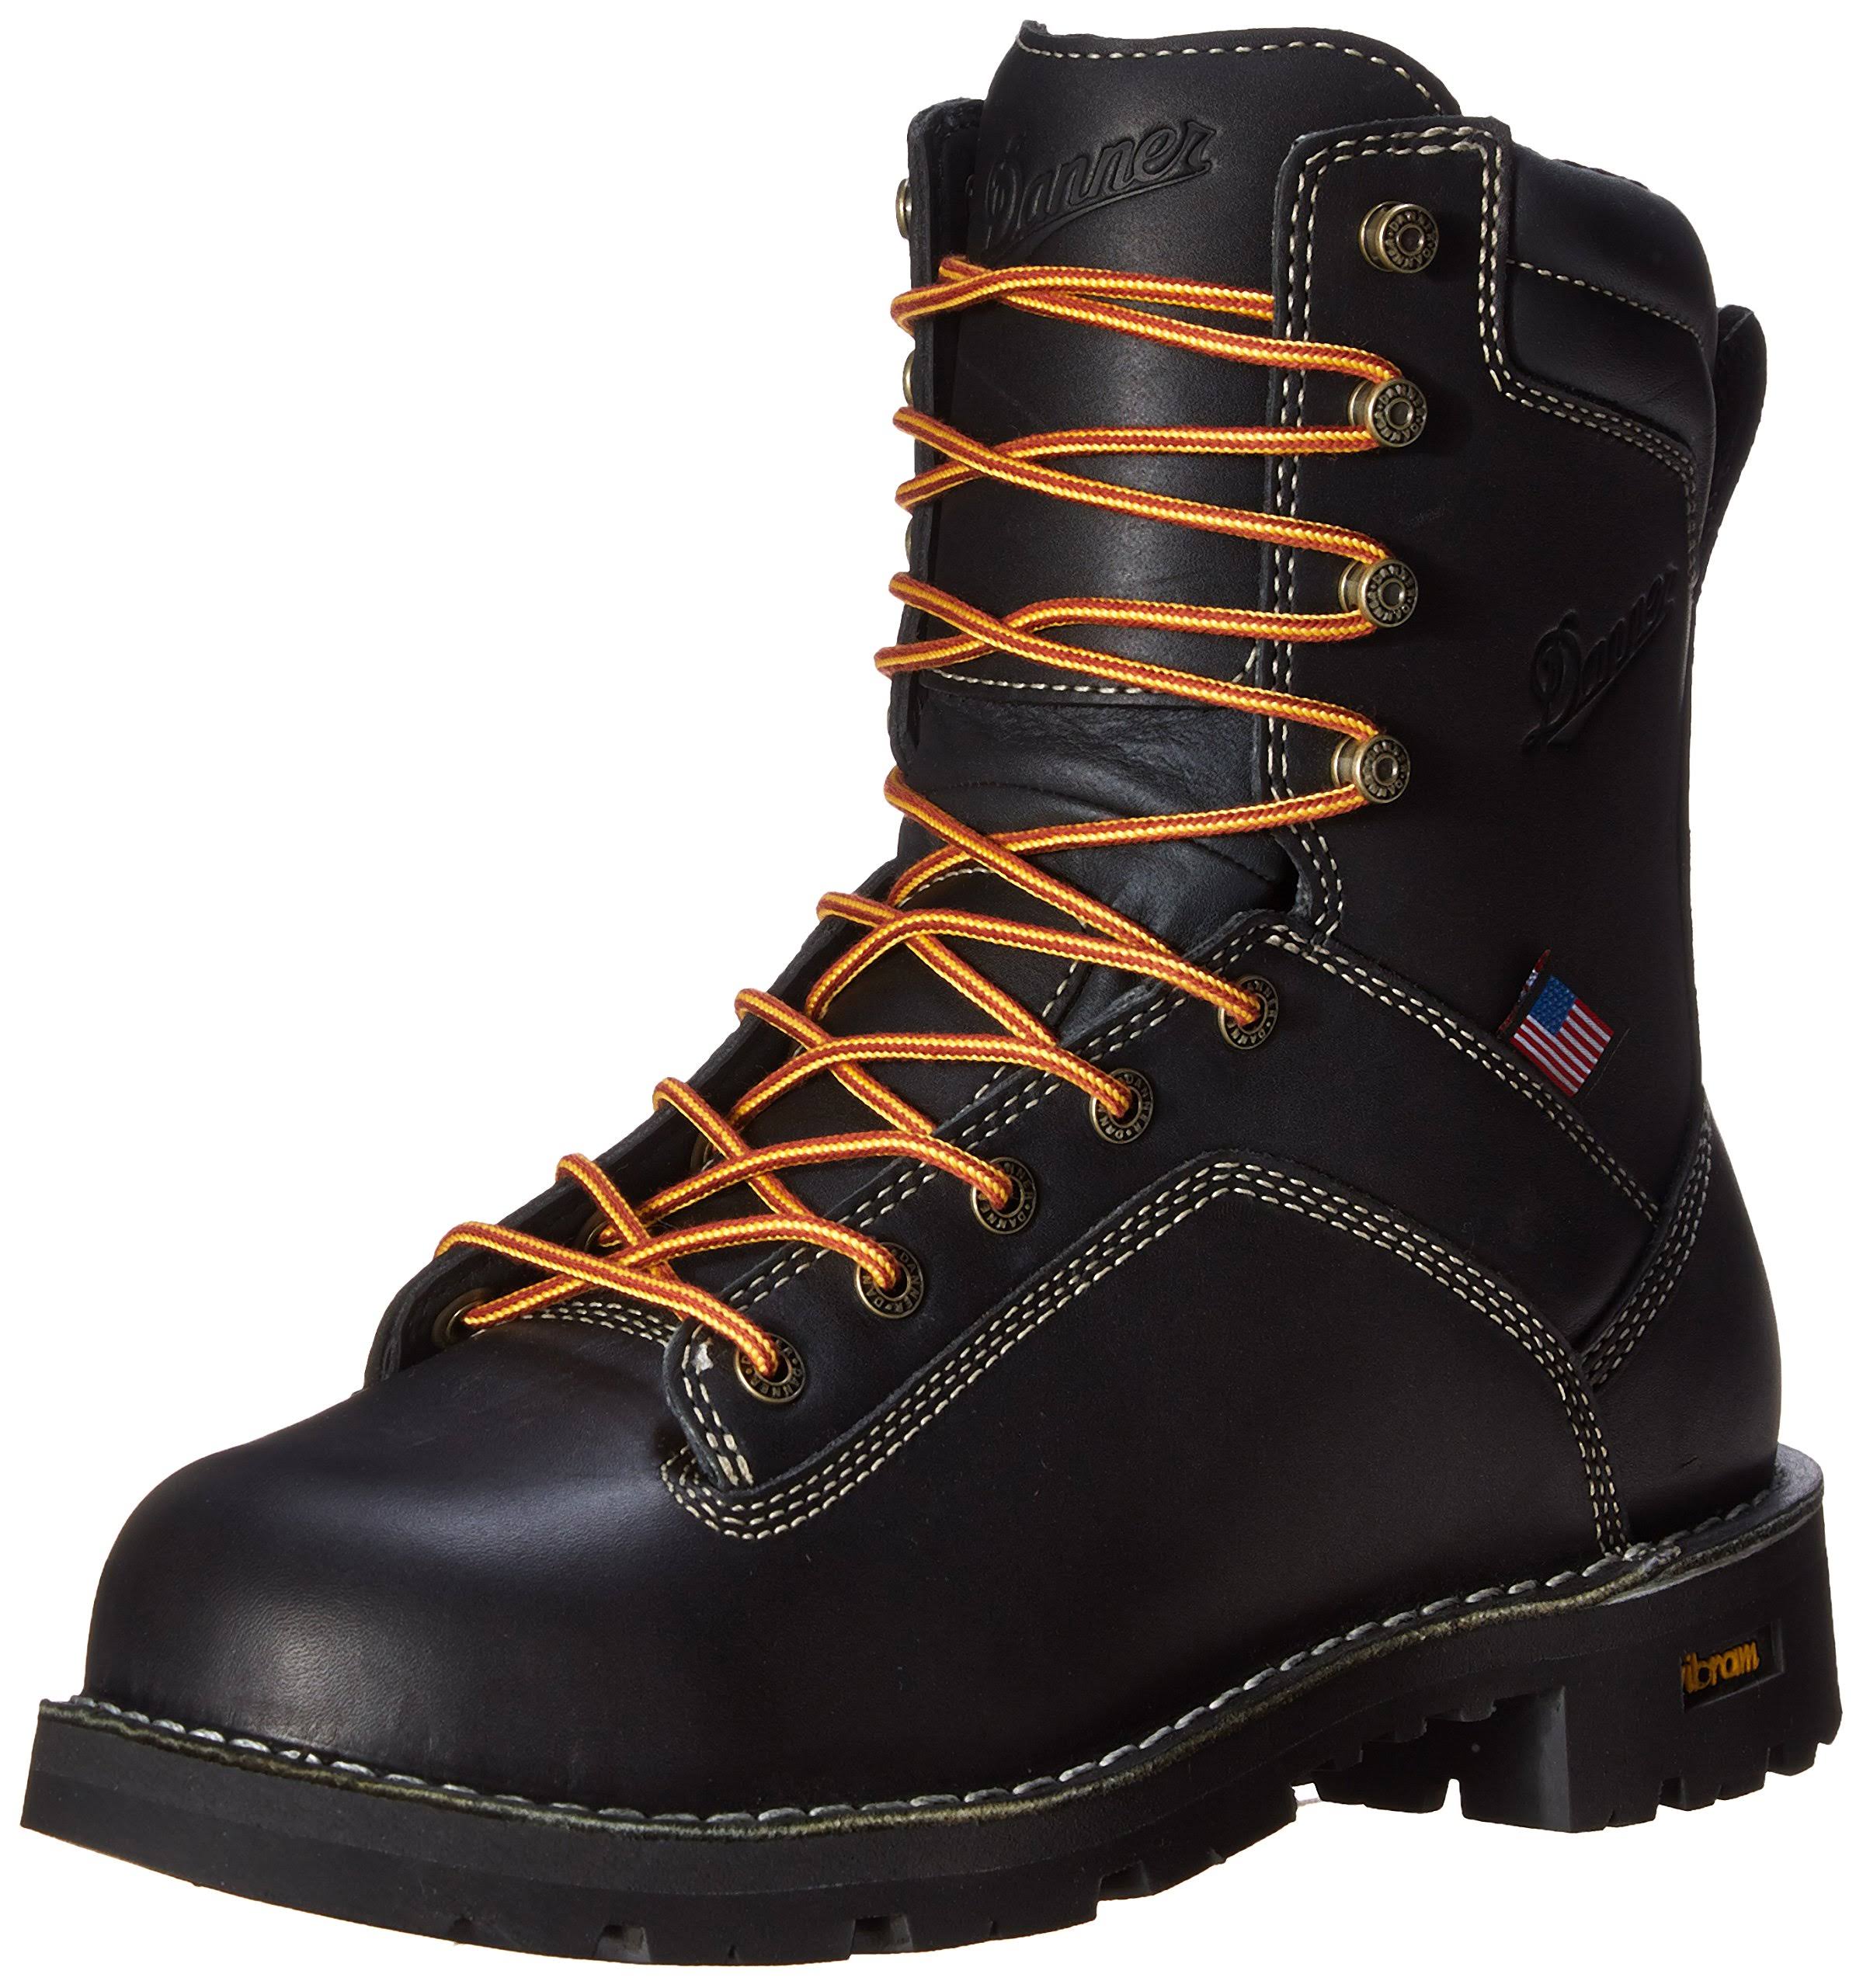 Danner Men's Quarry USA Leather Alloy Toe Waterproof Work Boots - Black, 8", 12US